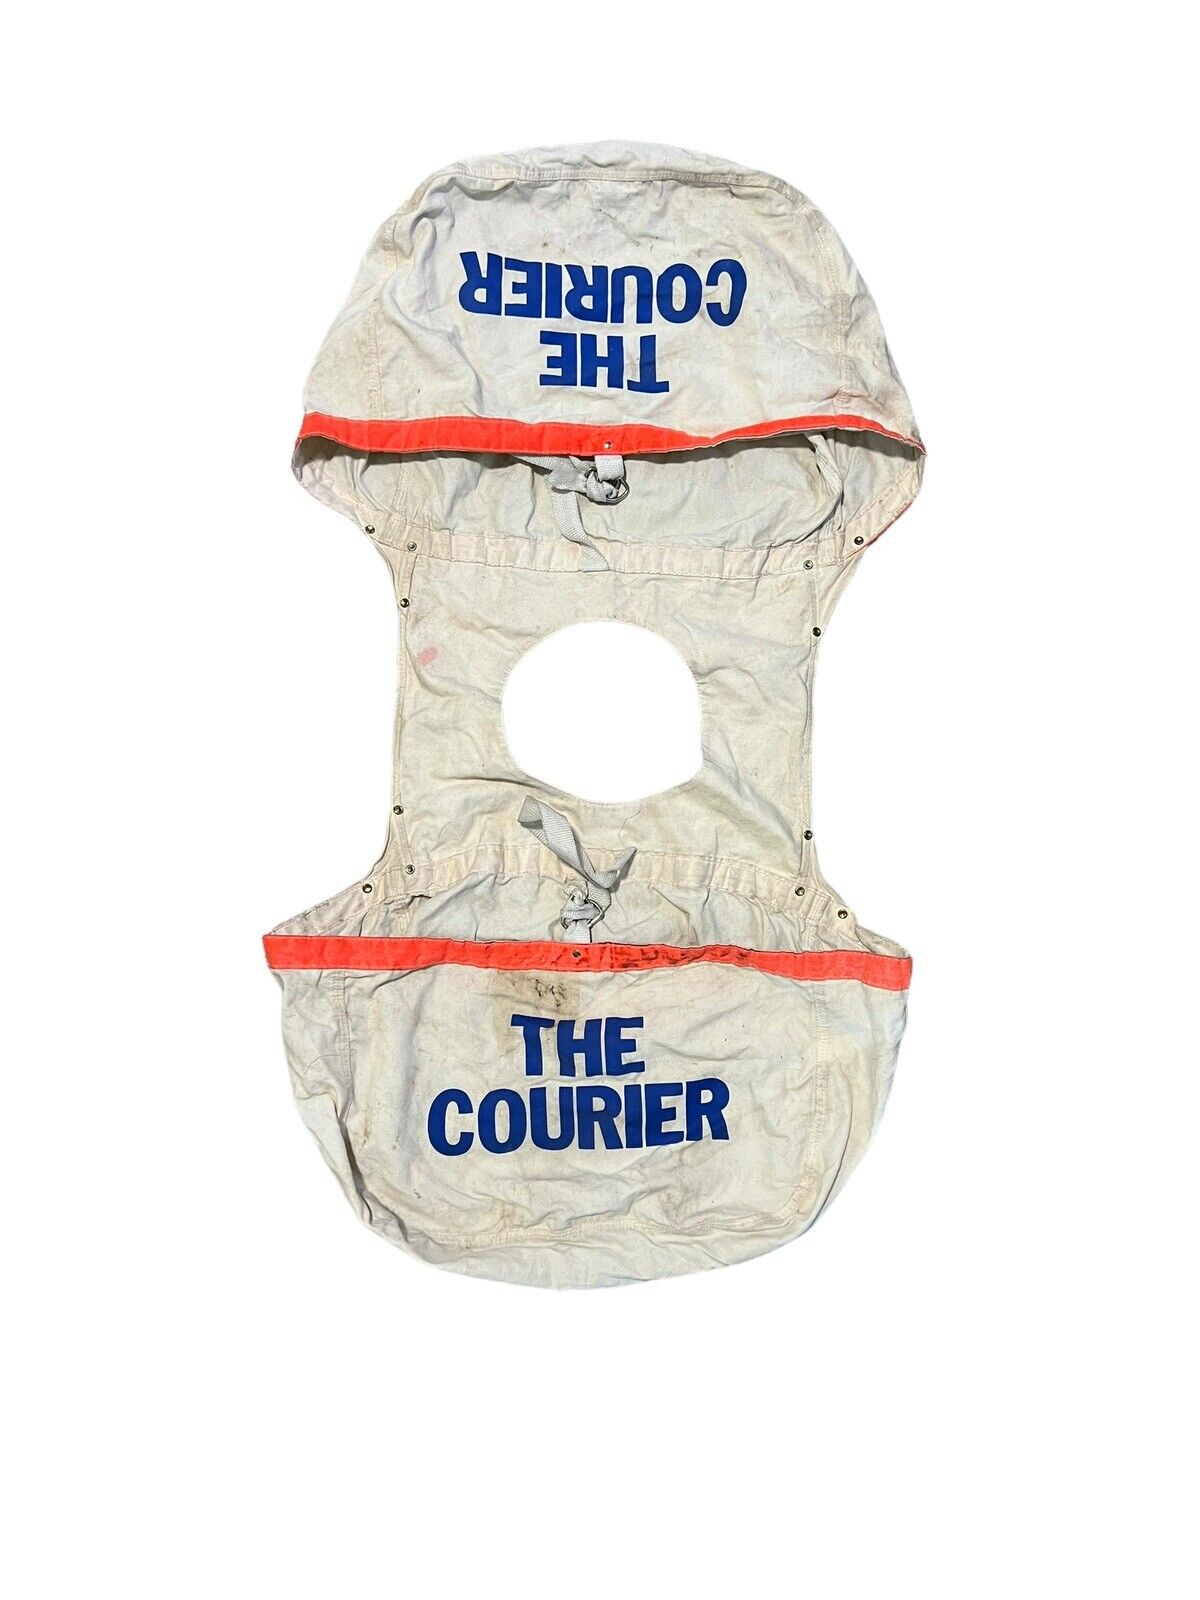 Vintage DOUBLE Newspaper Canvas Carrier Bag THE COURIER NEWSPAPER Paperboy PROP